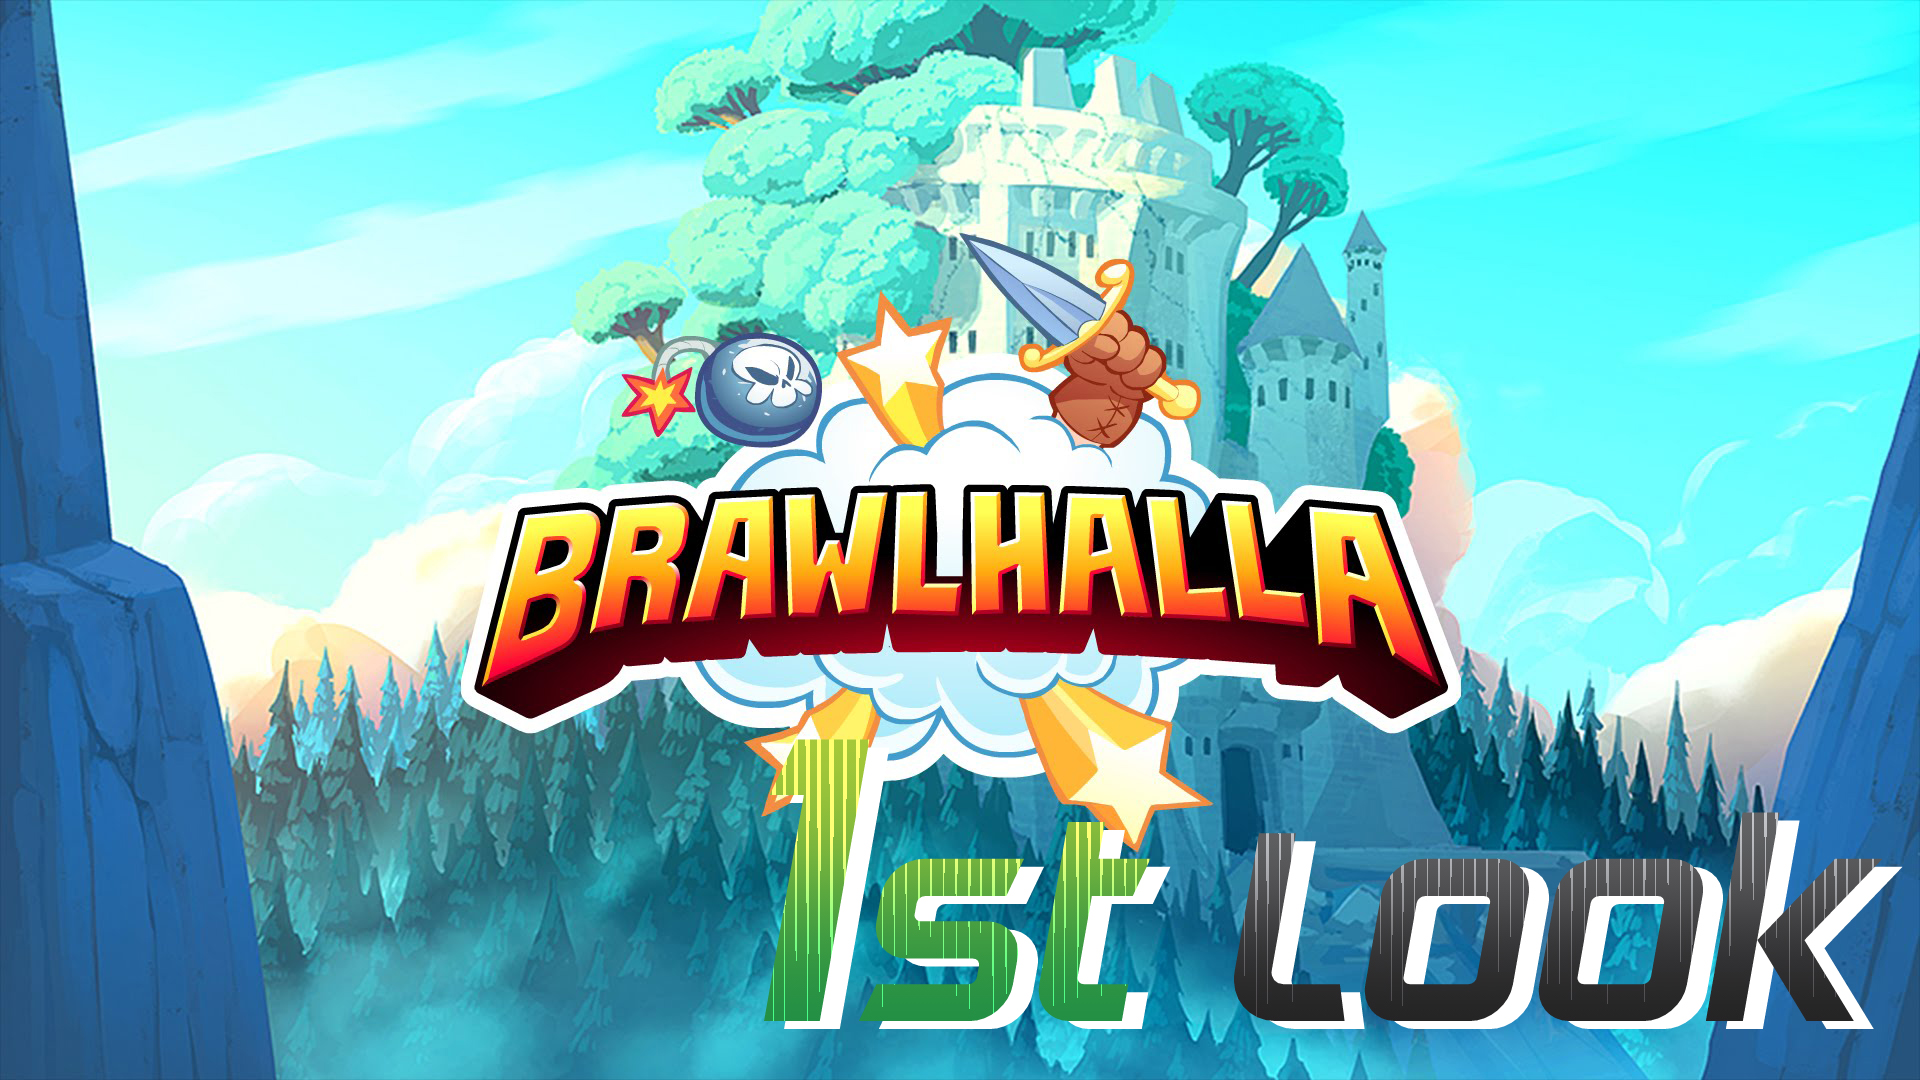 Colt takes a first look at Brawlhalla, a Smash Bros. adjacent fighter on Steam!